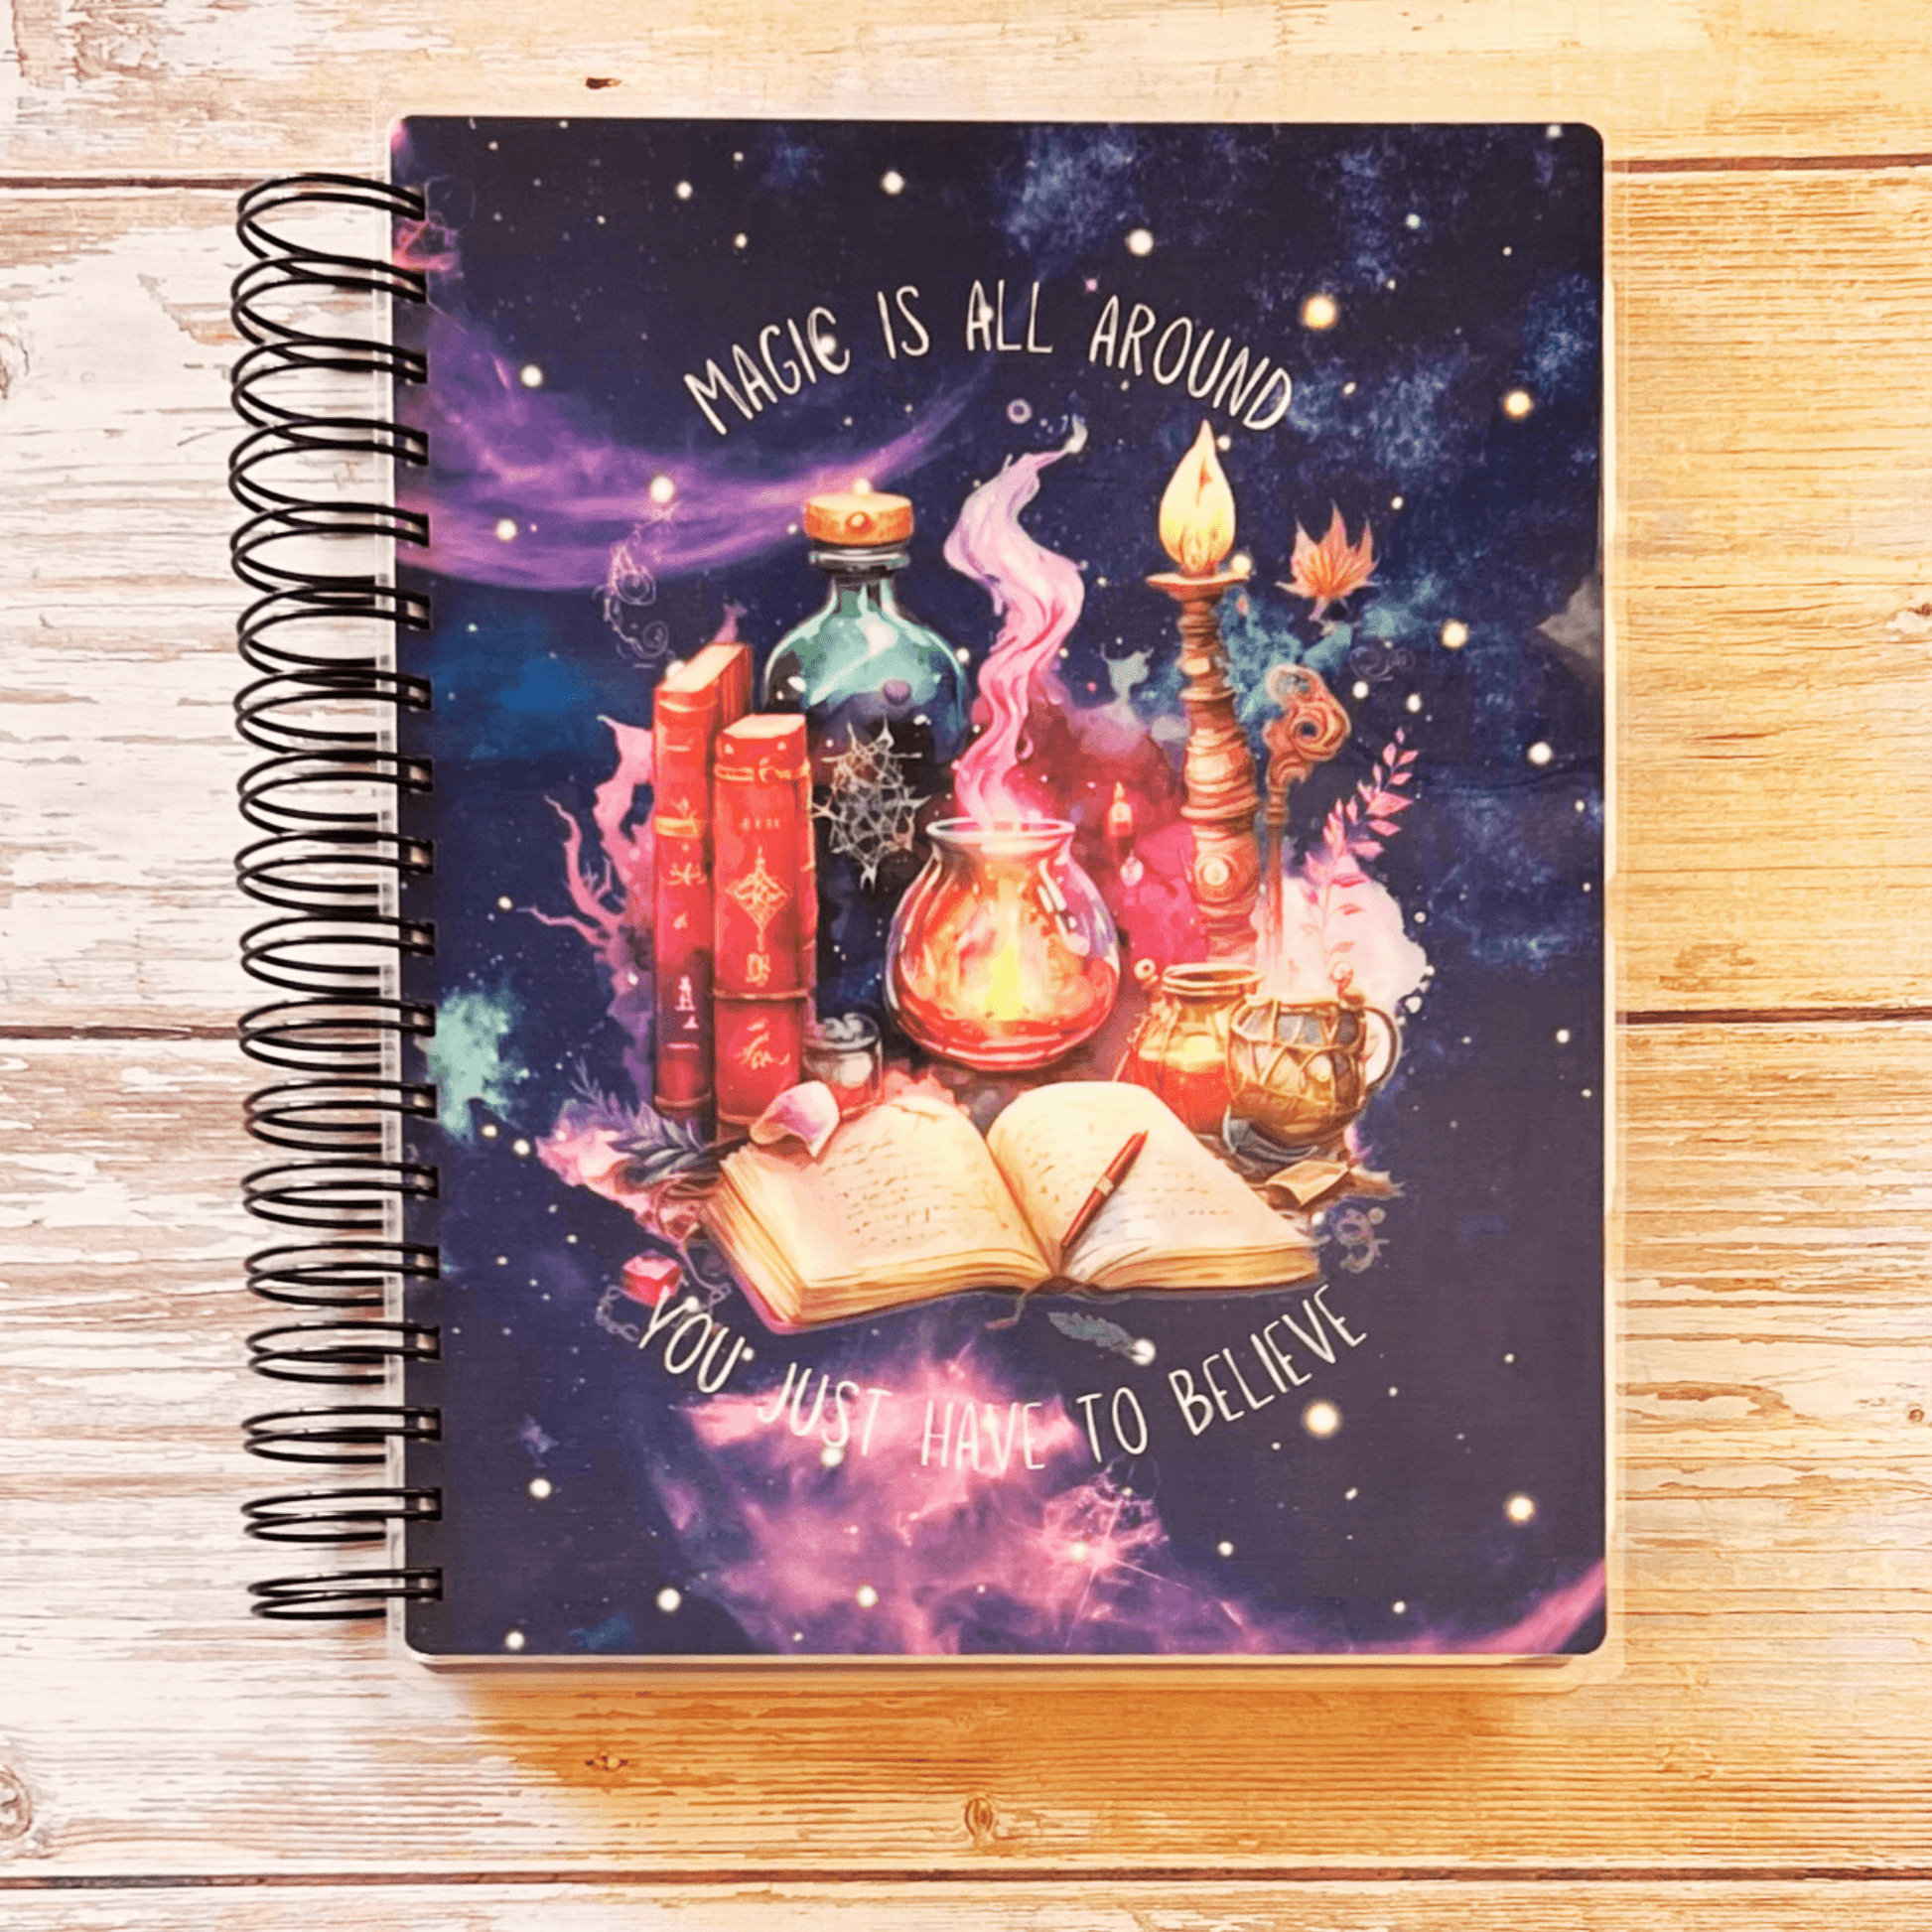 2023-2024 Personalized Monthly Planner - Mystical Spells Monthly Planners Artful Planner Co. July-2023 20 Meal Planner Pages added to back +$3.00 